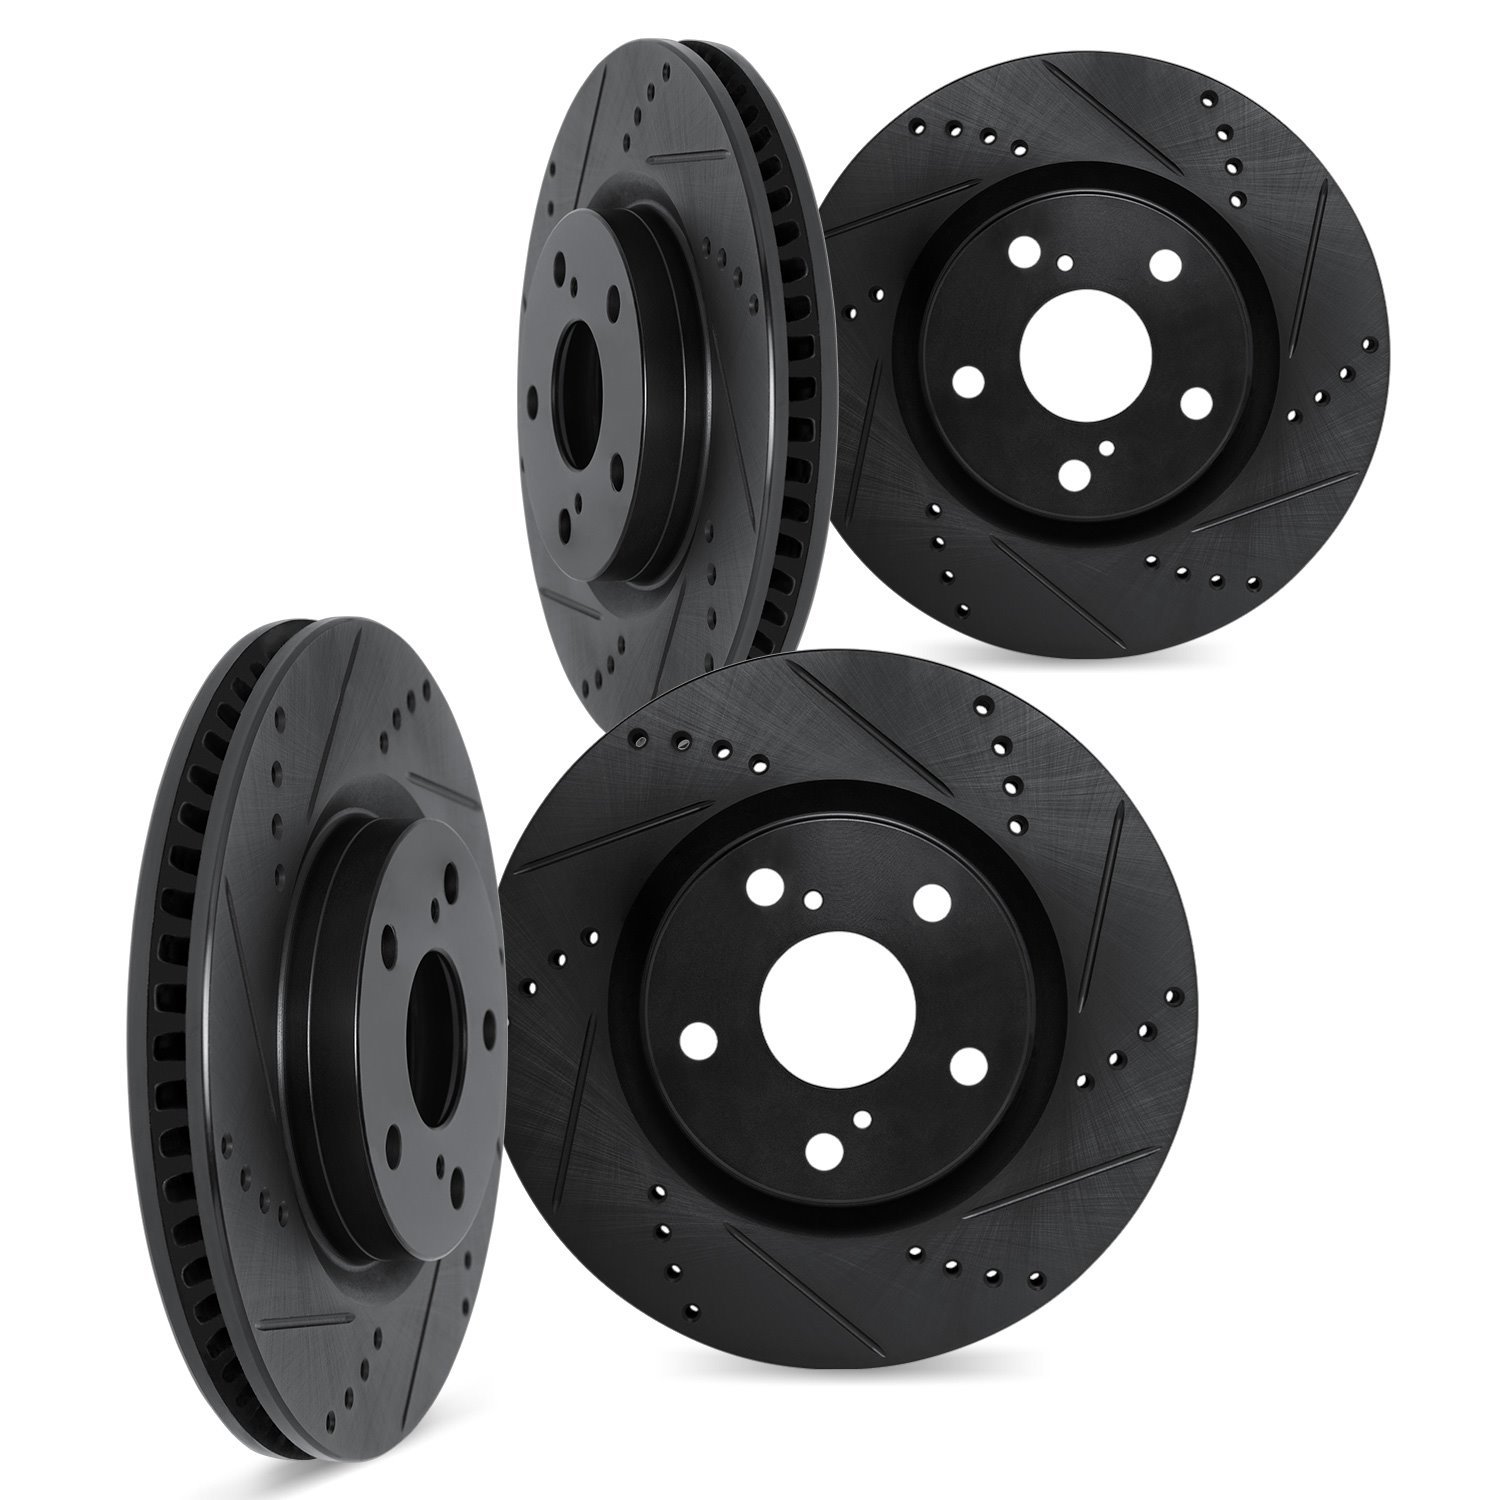 8004-31103 Drilled/Slotted Brake Rotors [Black], 2003-2008 BMW, Position: Front and Rear